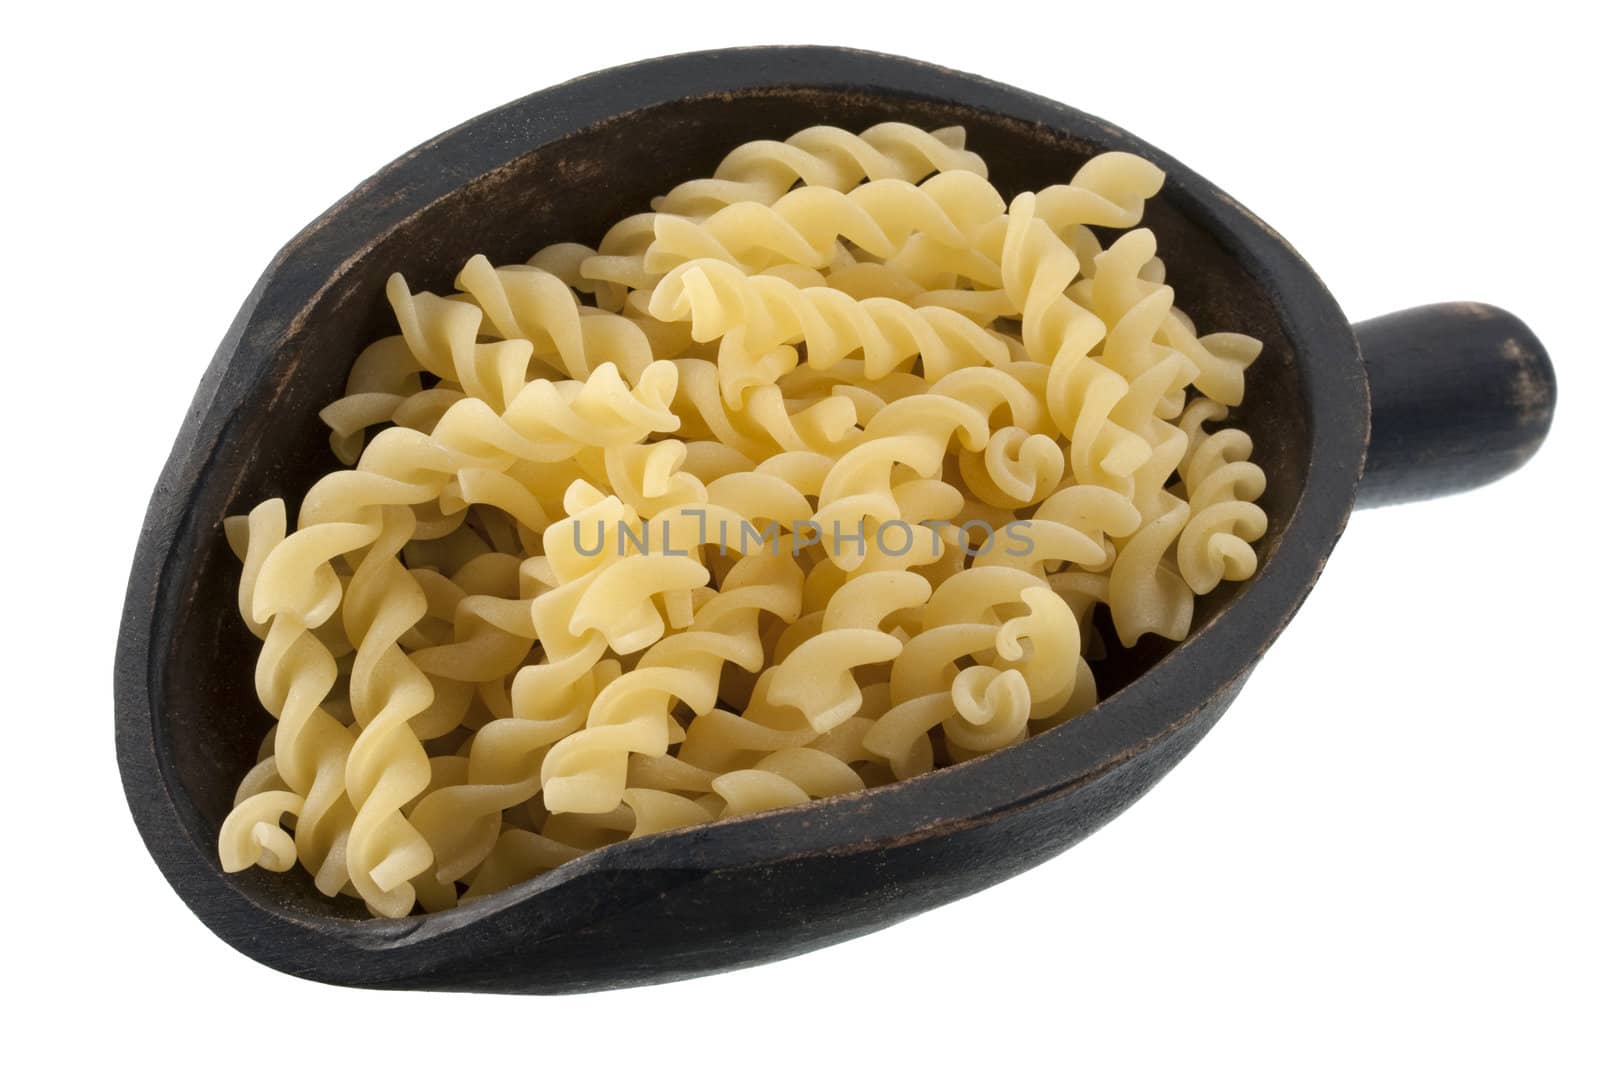 fusilli, corkscrew shaped, Italian pasta on a rustic, wooden scoop, isolated on white